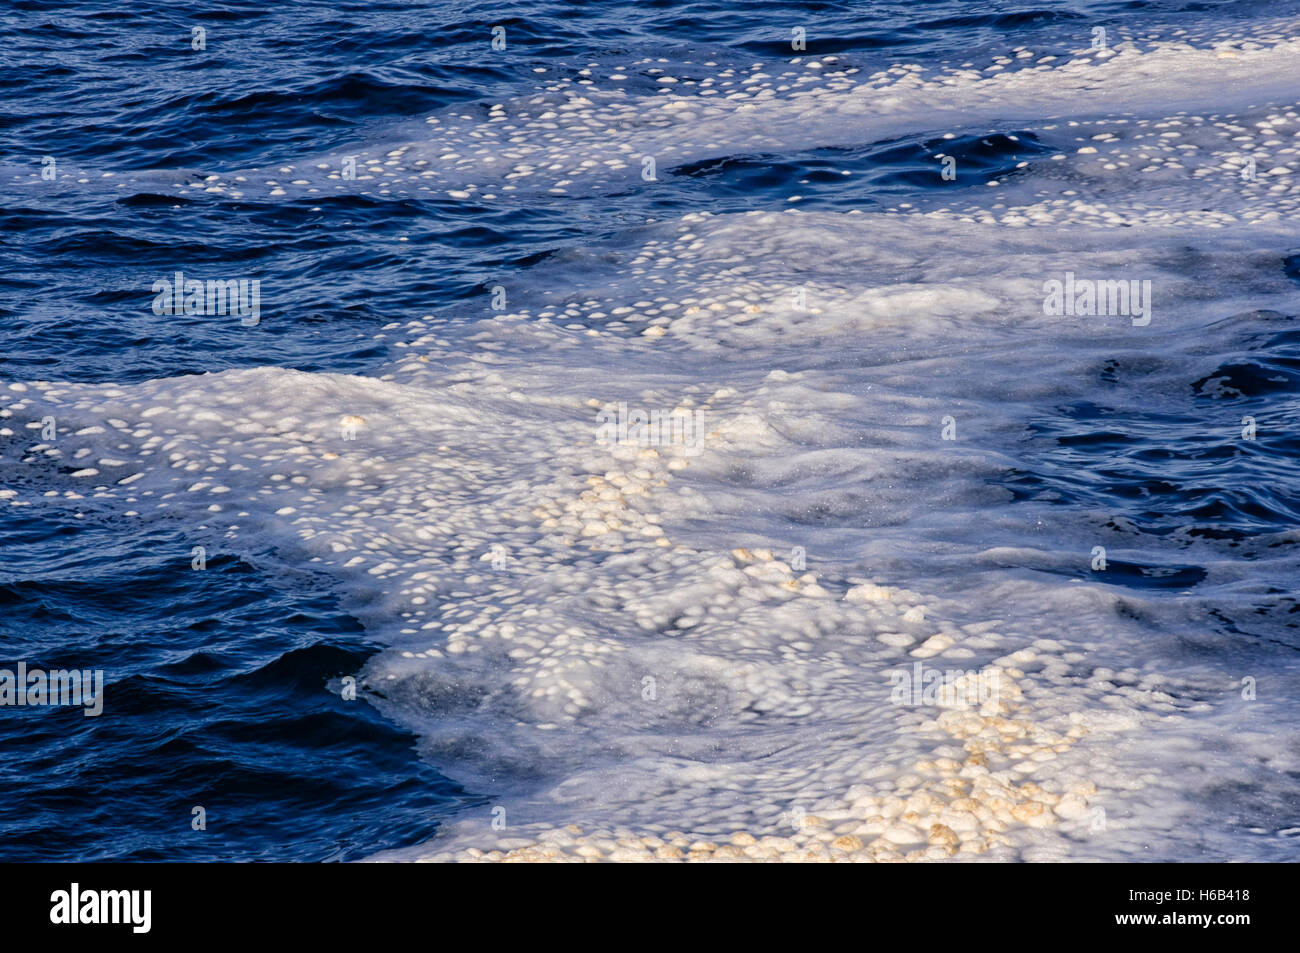 EUROPE, UNITED KINGDOM, UK, SCOTLAND, ORKNEY, Yesnaby, detergent pollution in the sea Stock Photo